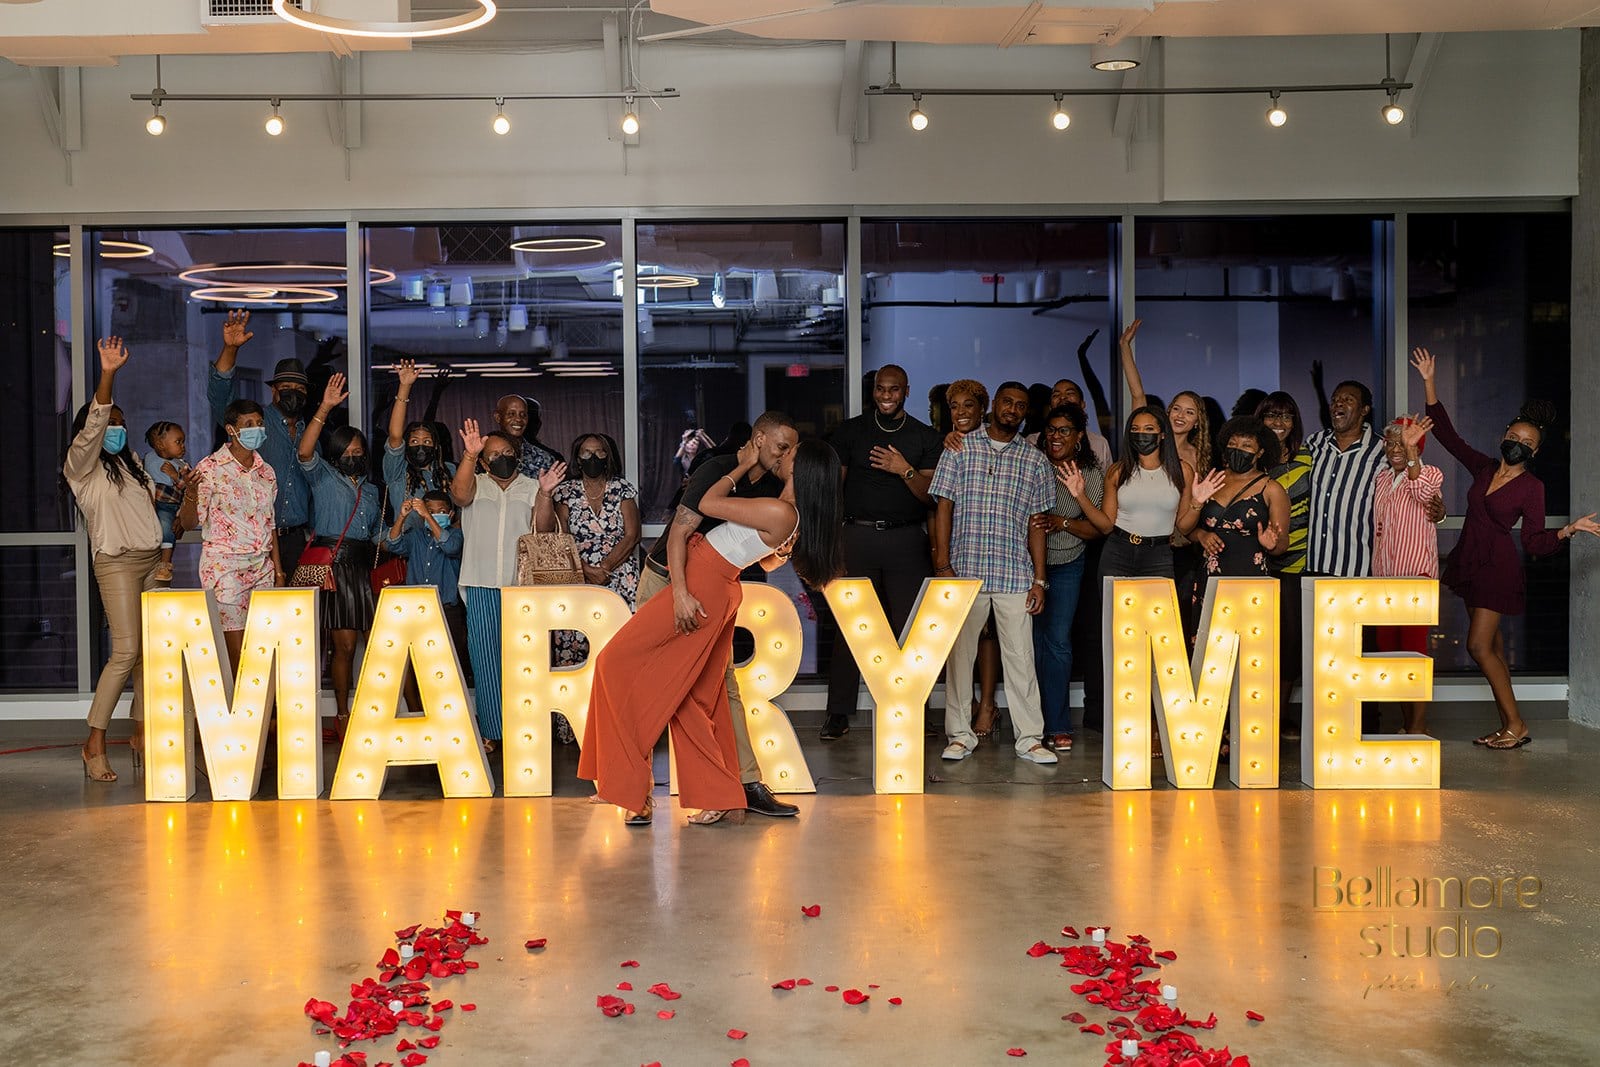 newly engagec couple kissing in front of the marry me sign after their downtown orlando marriage proposal with their friends and family behind the sign cheering.